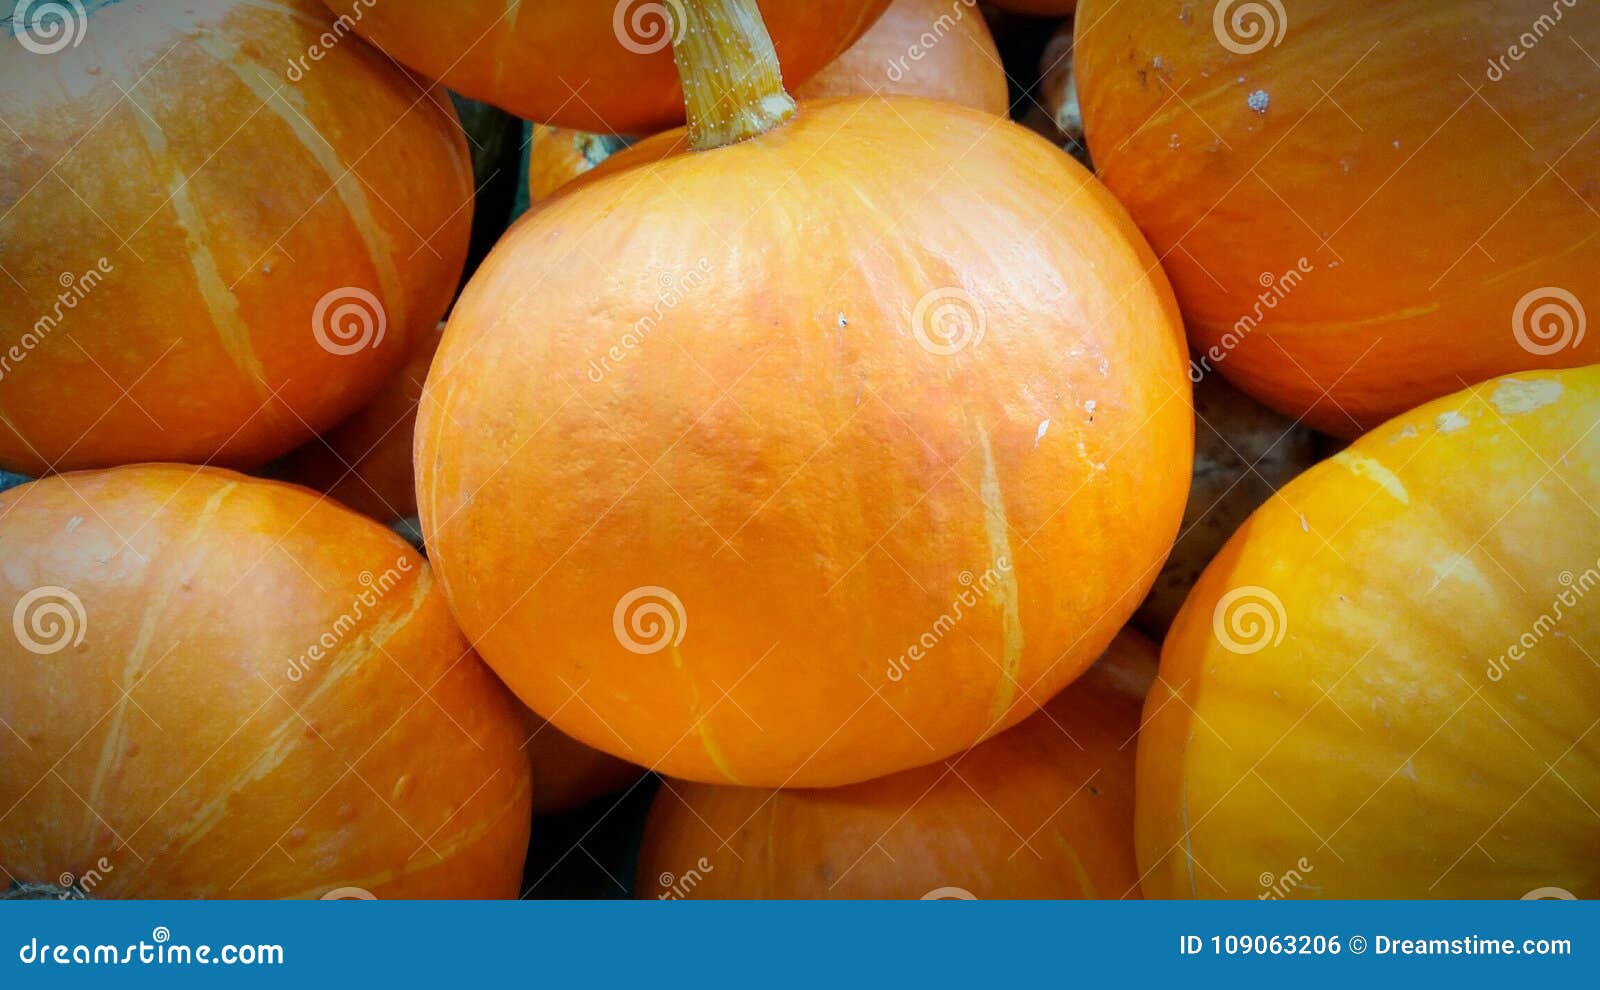 Kabocha Squash Japanese Pumpkin Stock Photo Image Of Picture Also 109063206,What Is Brinell Hardness